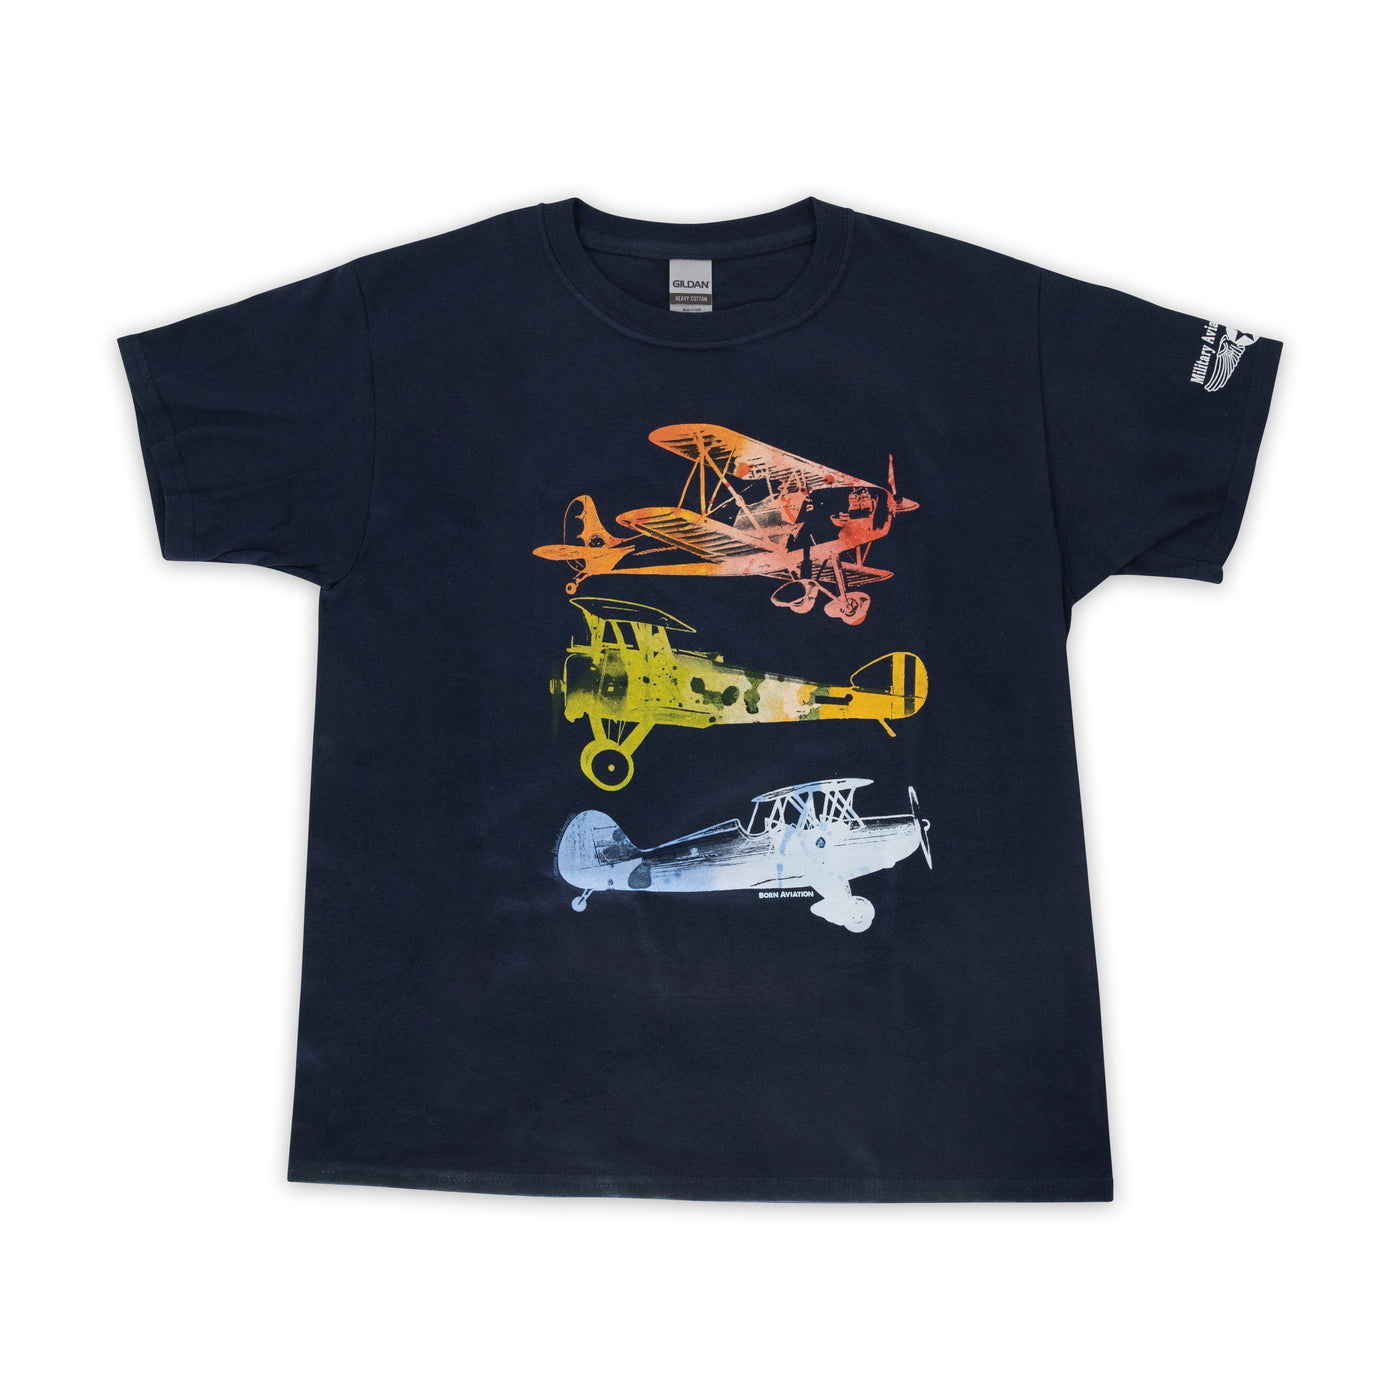 Youth 3 Biplanes T-shirt